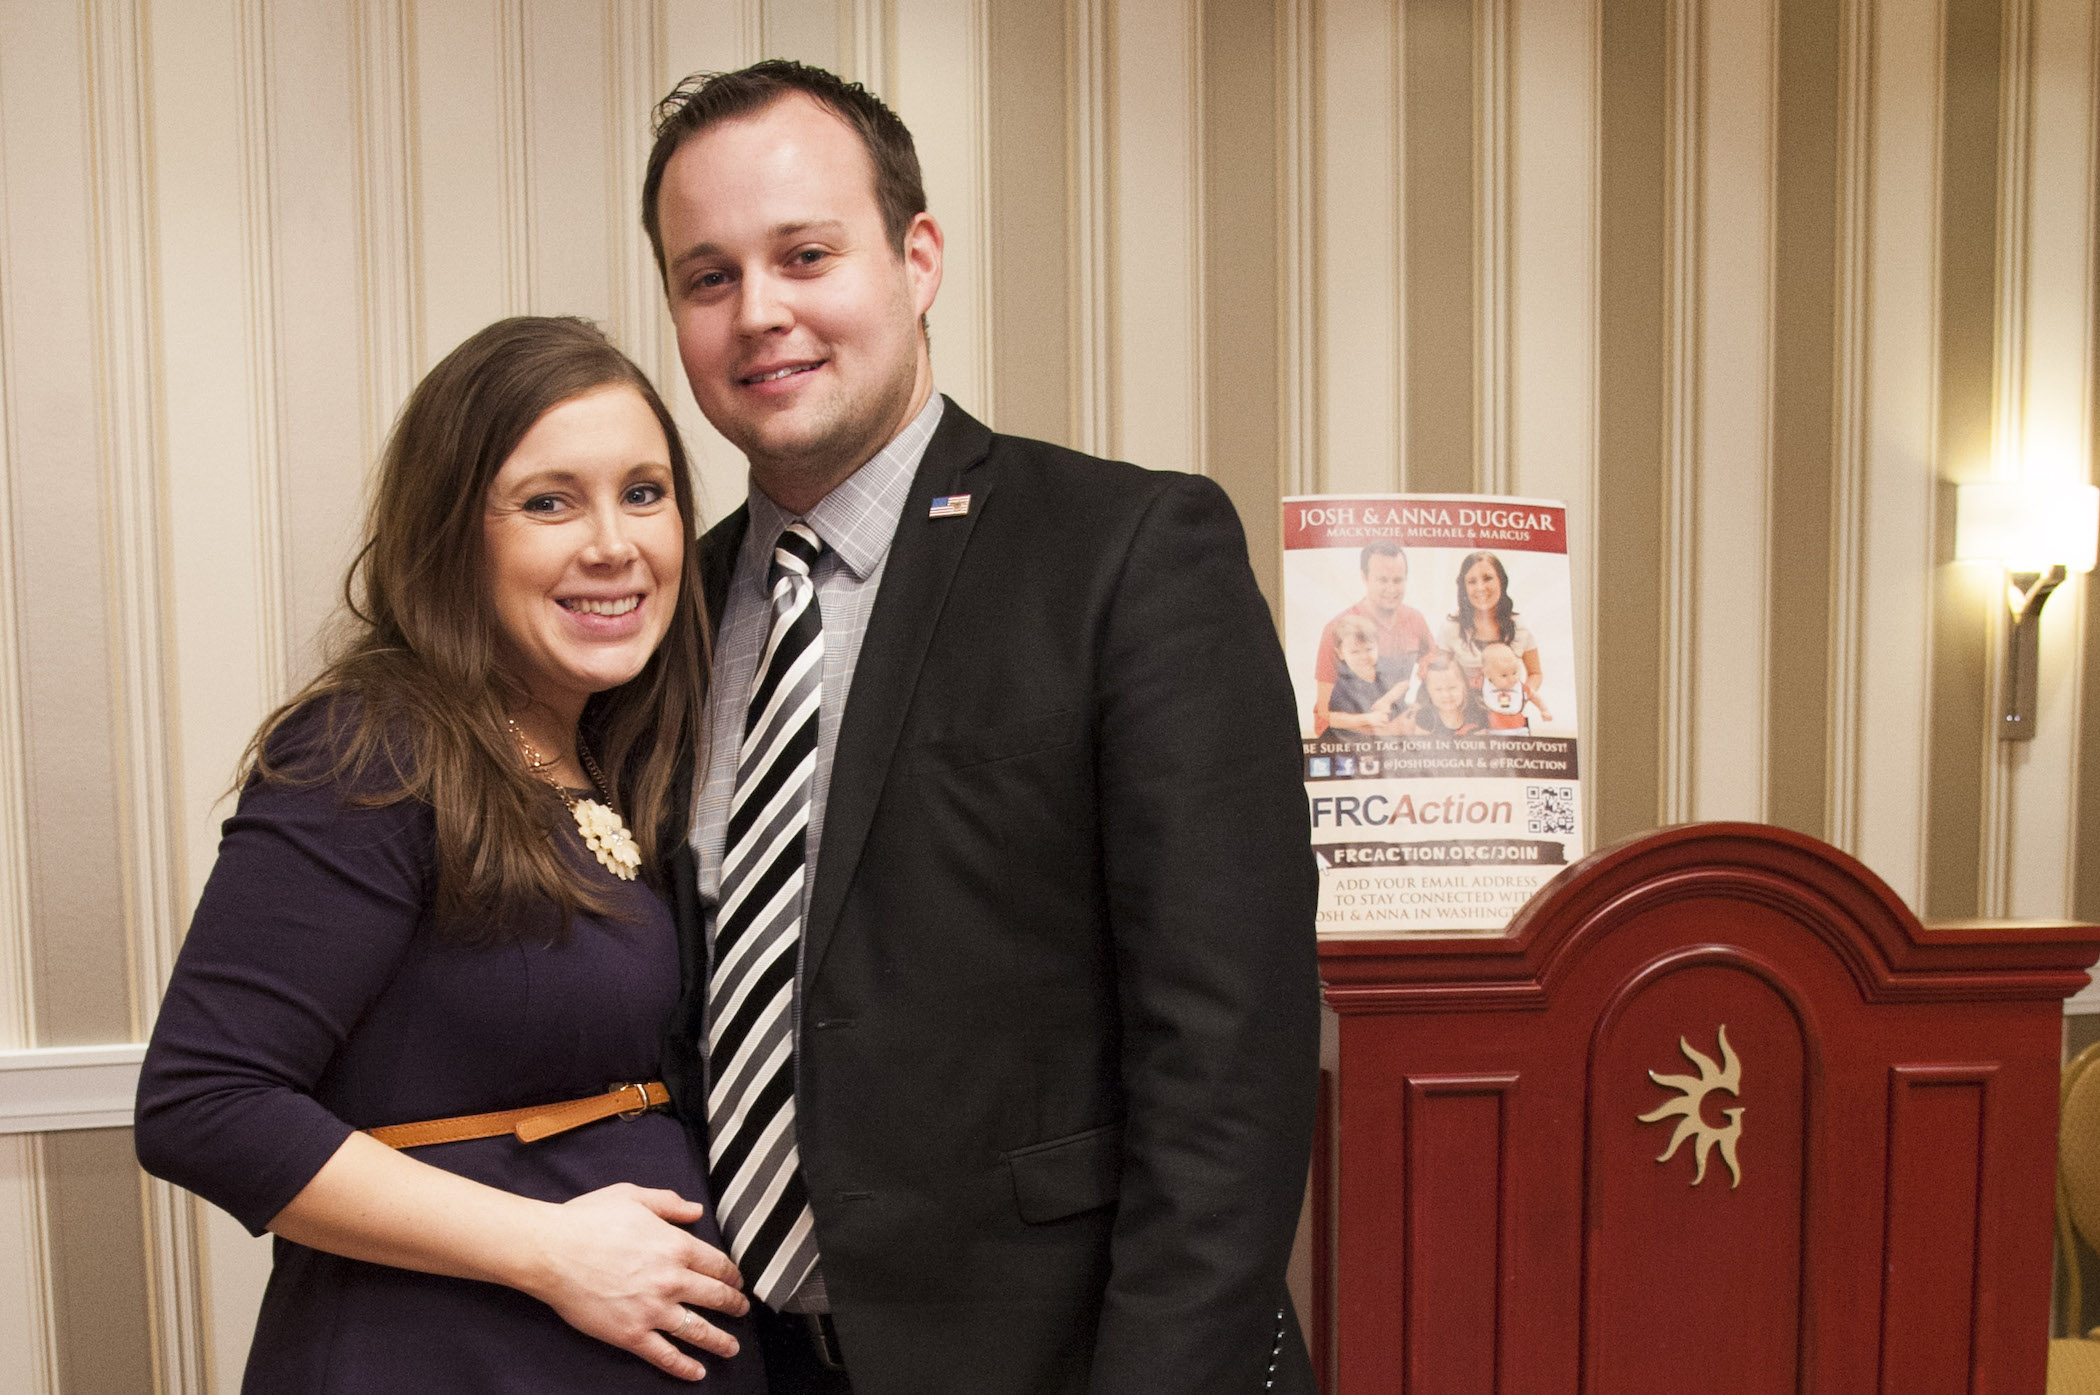 Anna Duggar and Josh Duggar standing together and smiling at an event. Anna is pregnant and holding her belly with one hand